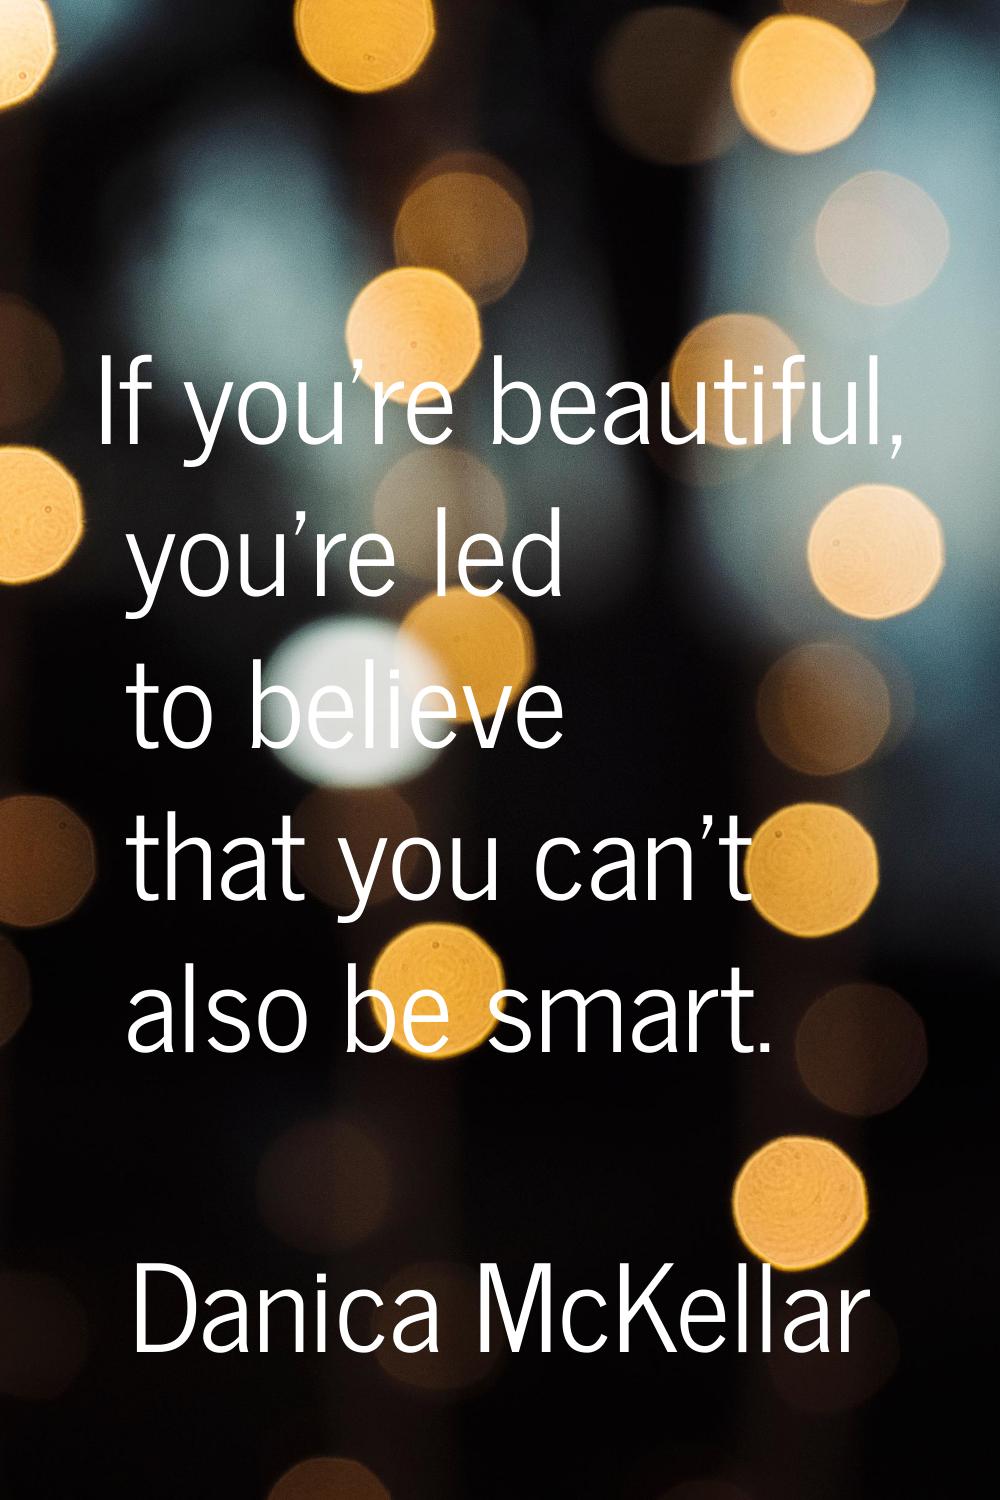 If you're beautiful, you're led to believe that you can't also be smart.